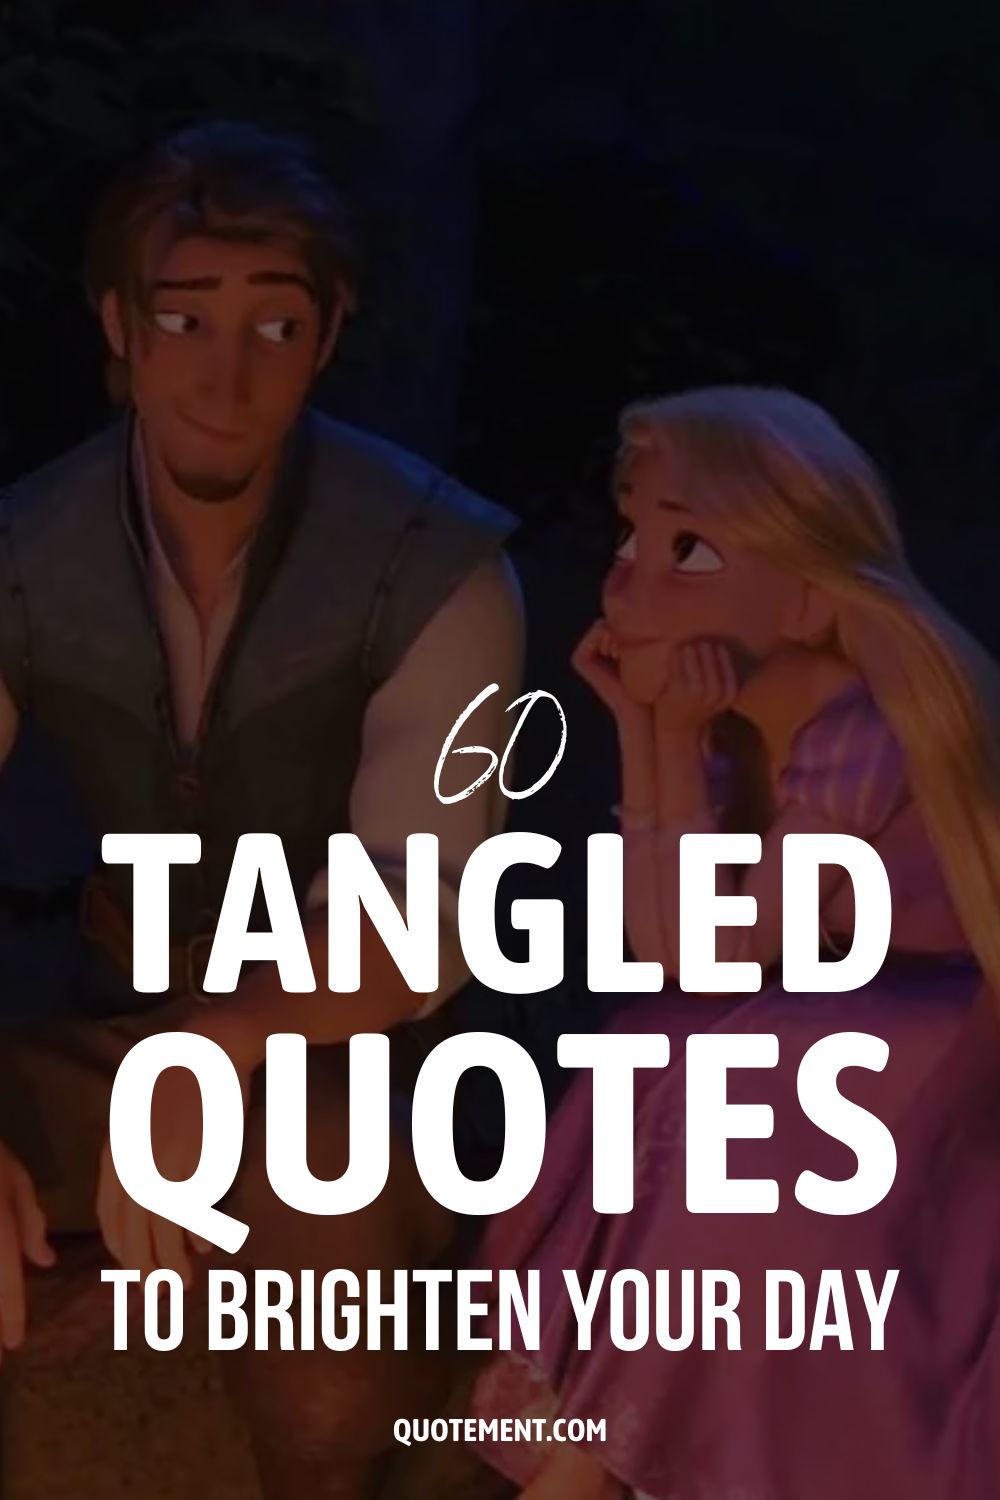 60 Tangled Quotes To Brighten Your Day
